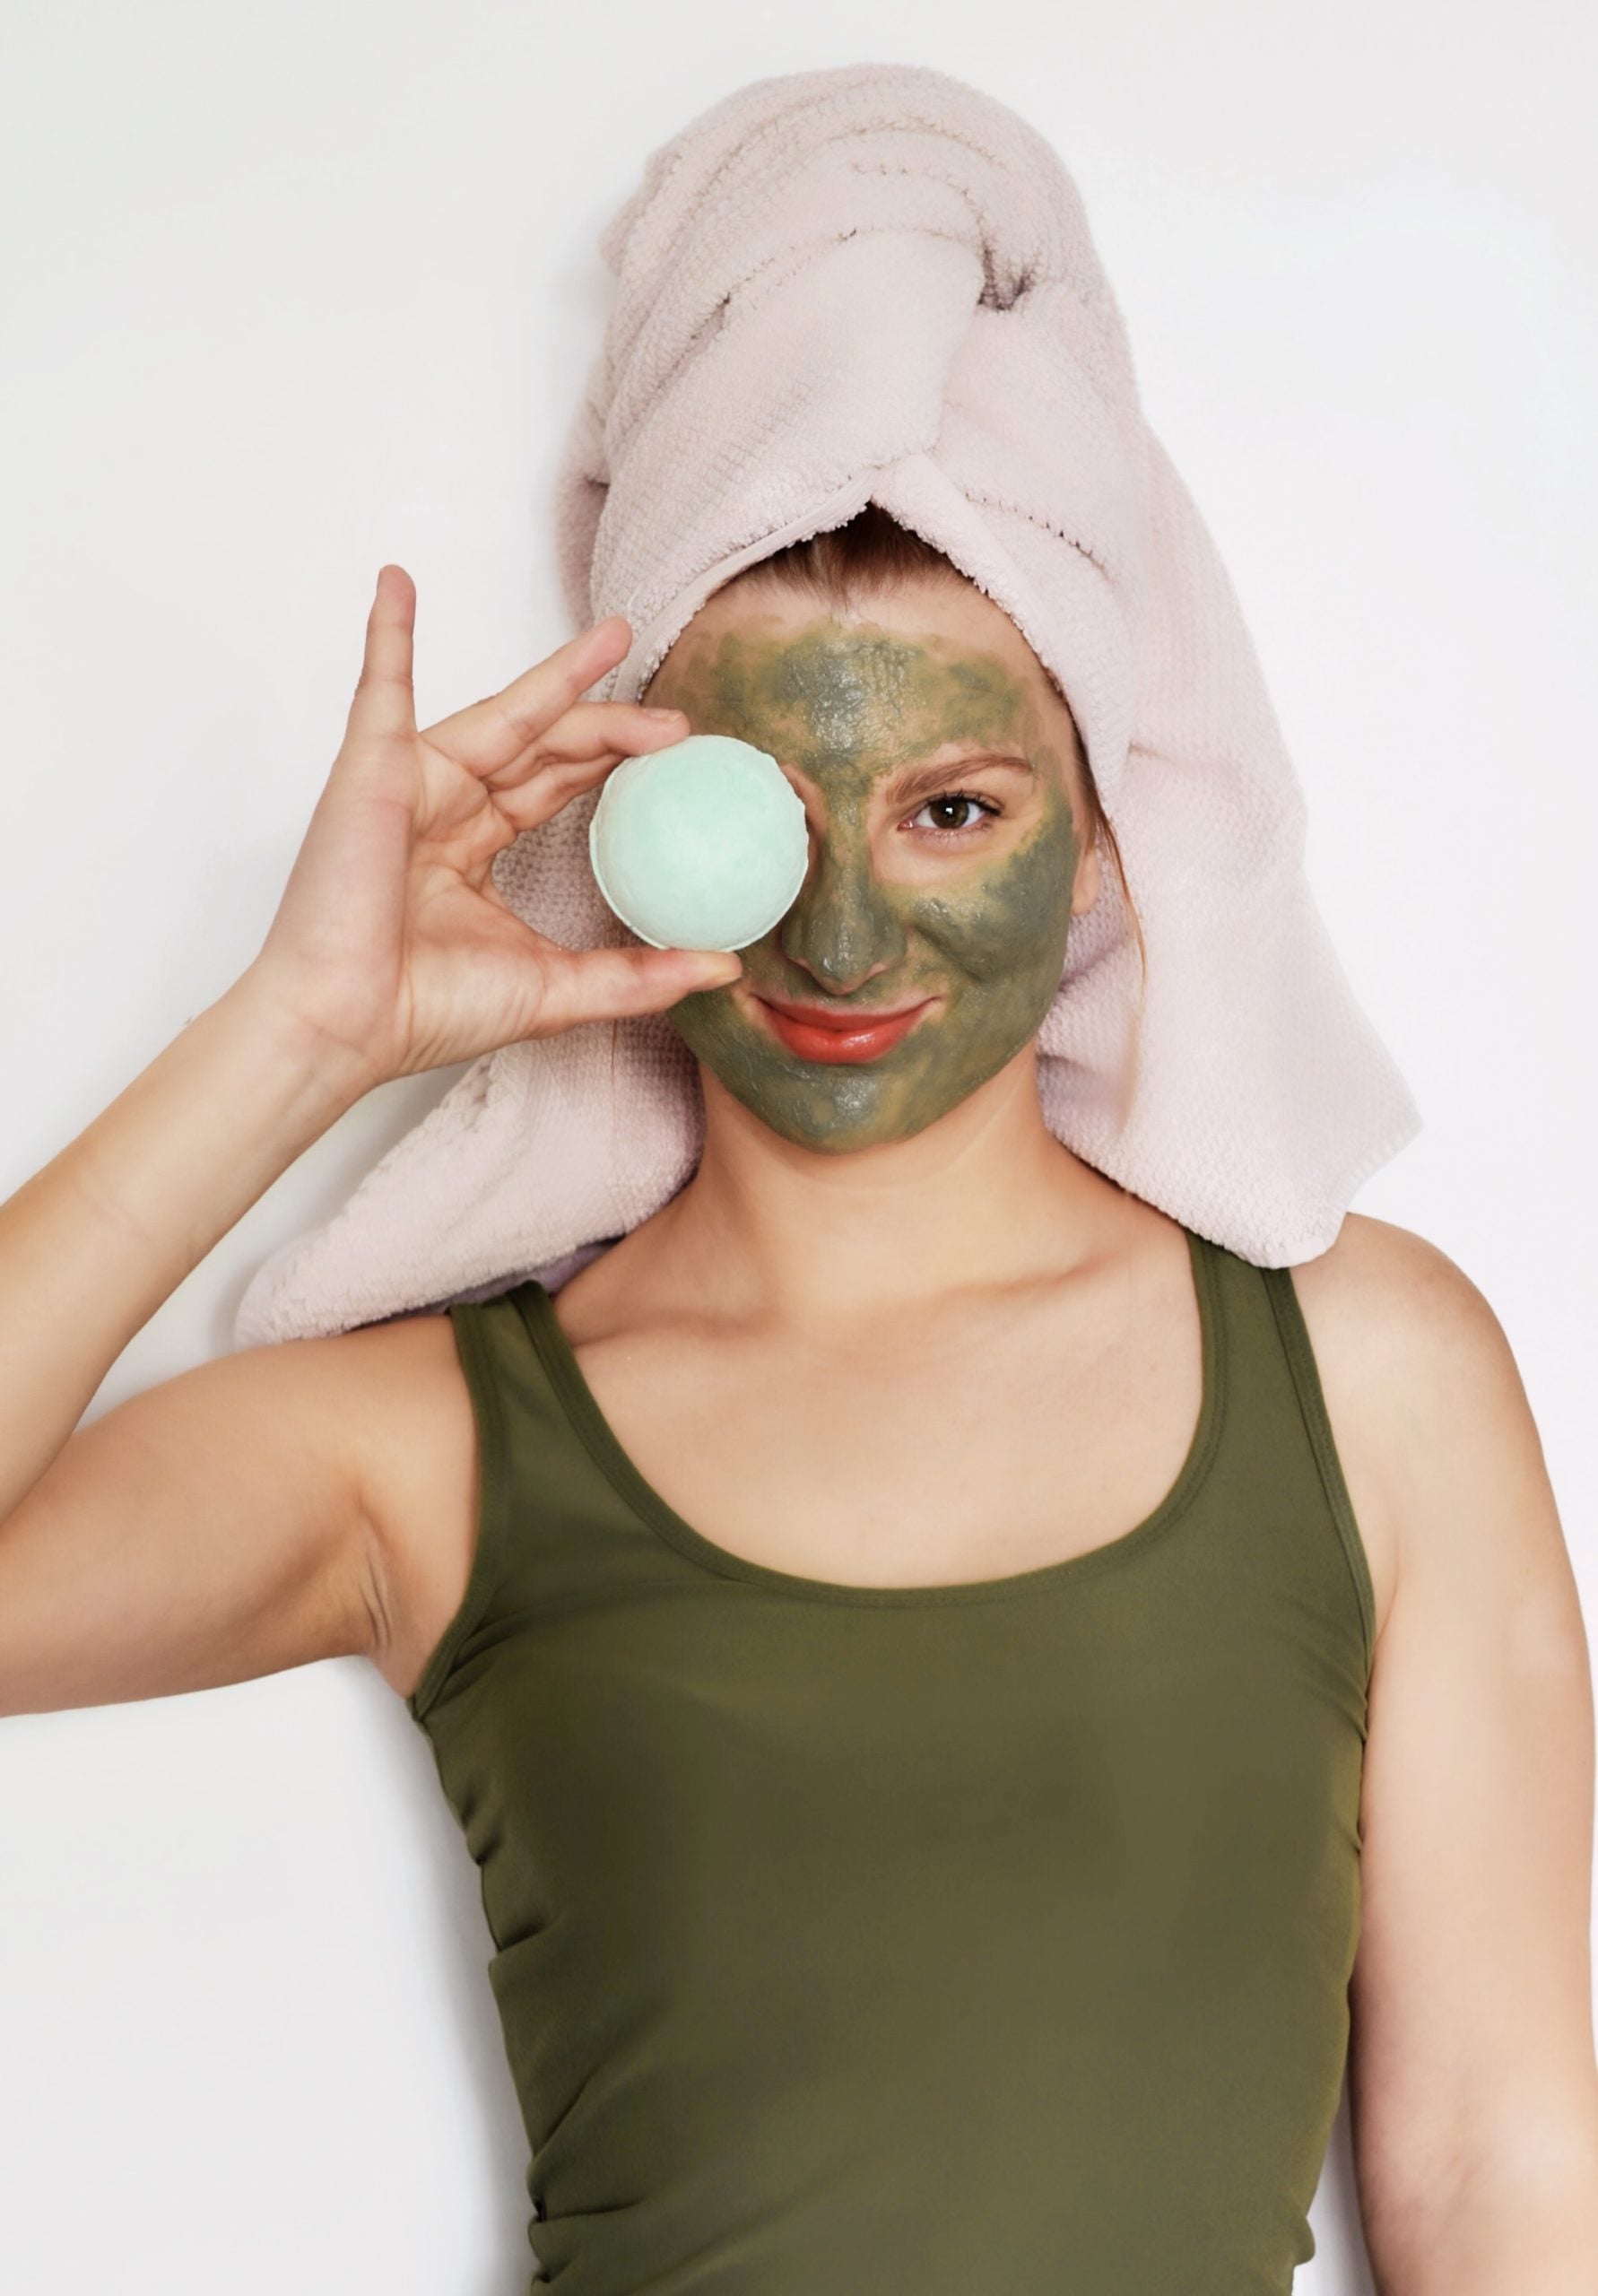 CBD Skincare & CBD Beauty Products: Why Is CBD Good For Your Skin?